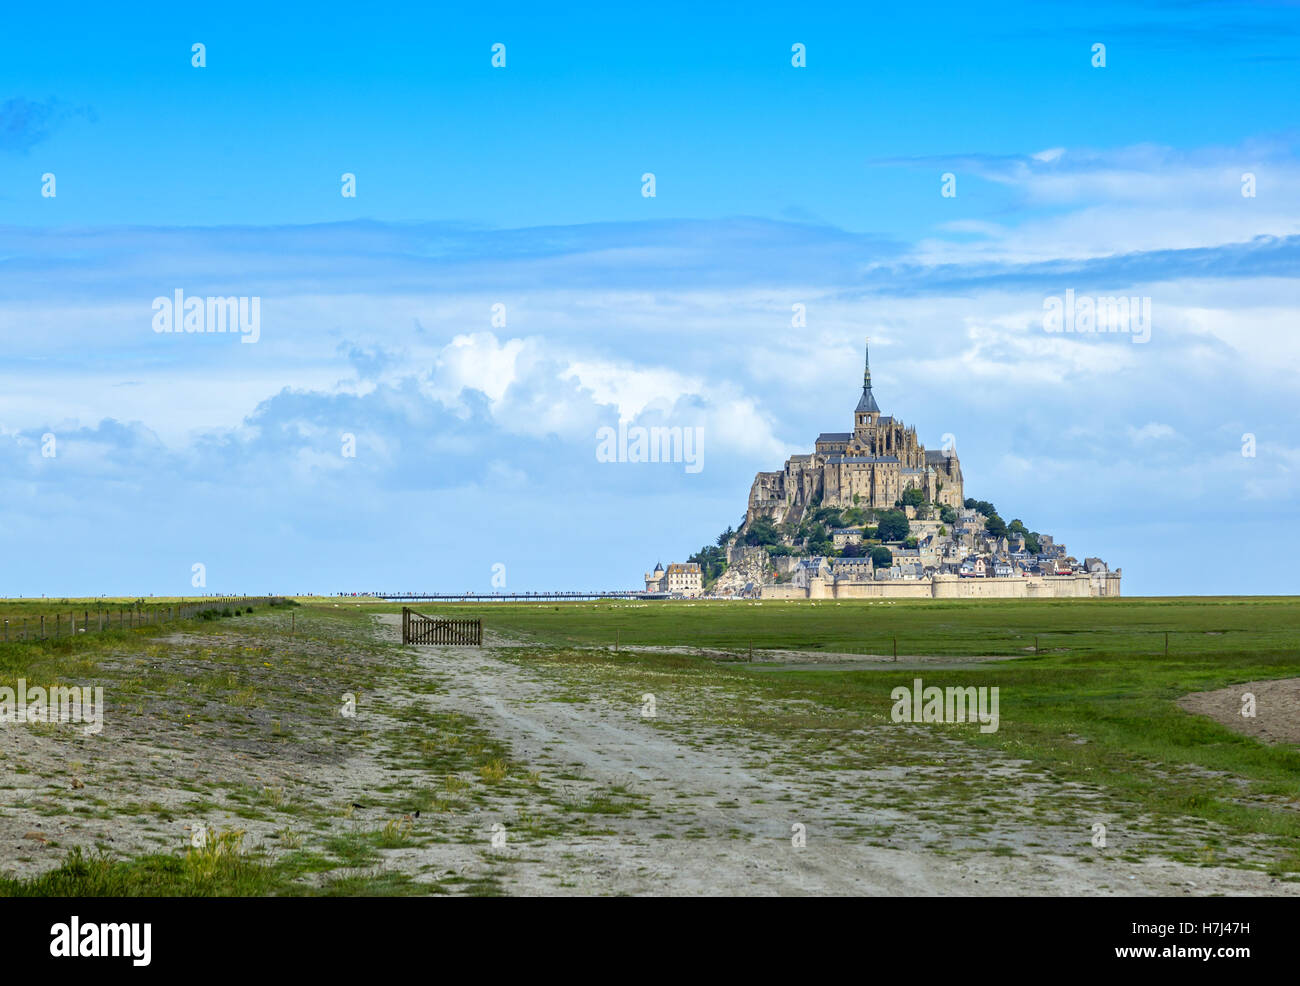 Image of Mont Saint Michel Monastery located in Normandy in North of France. This is one of the most visited sights from France. Stock Photo